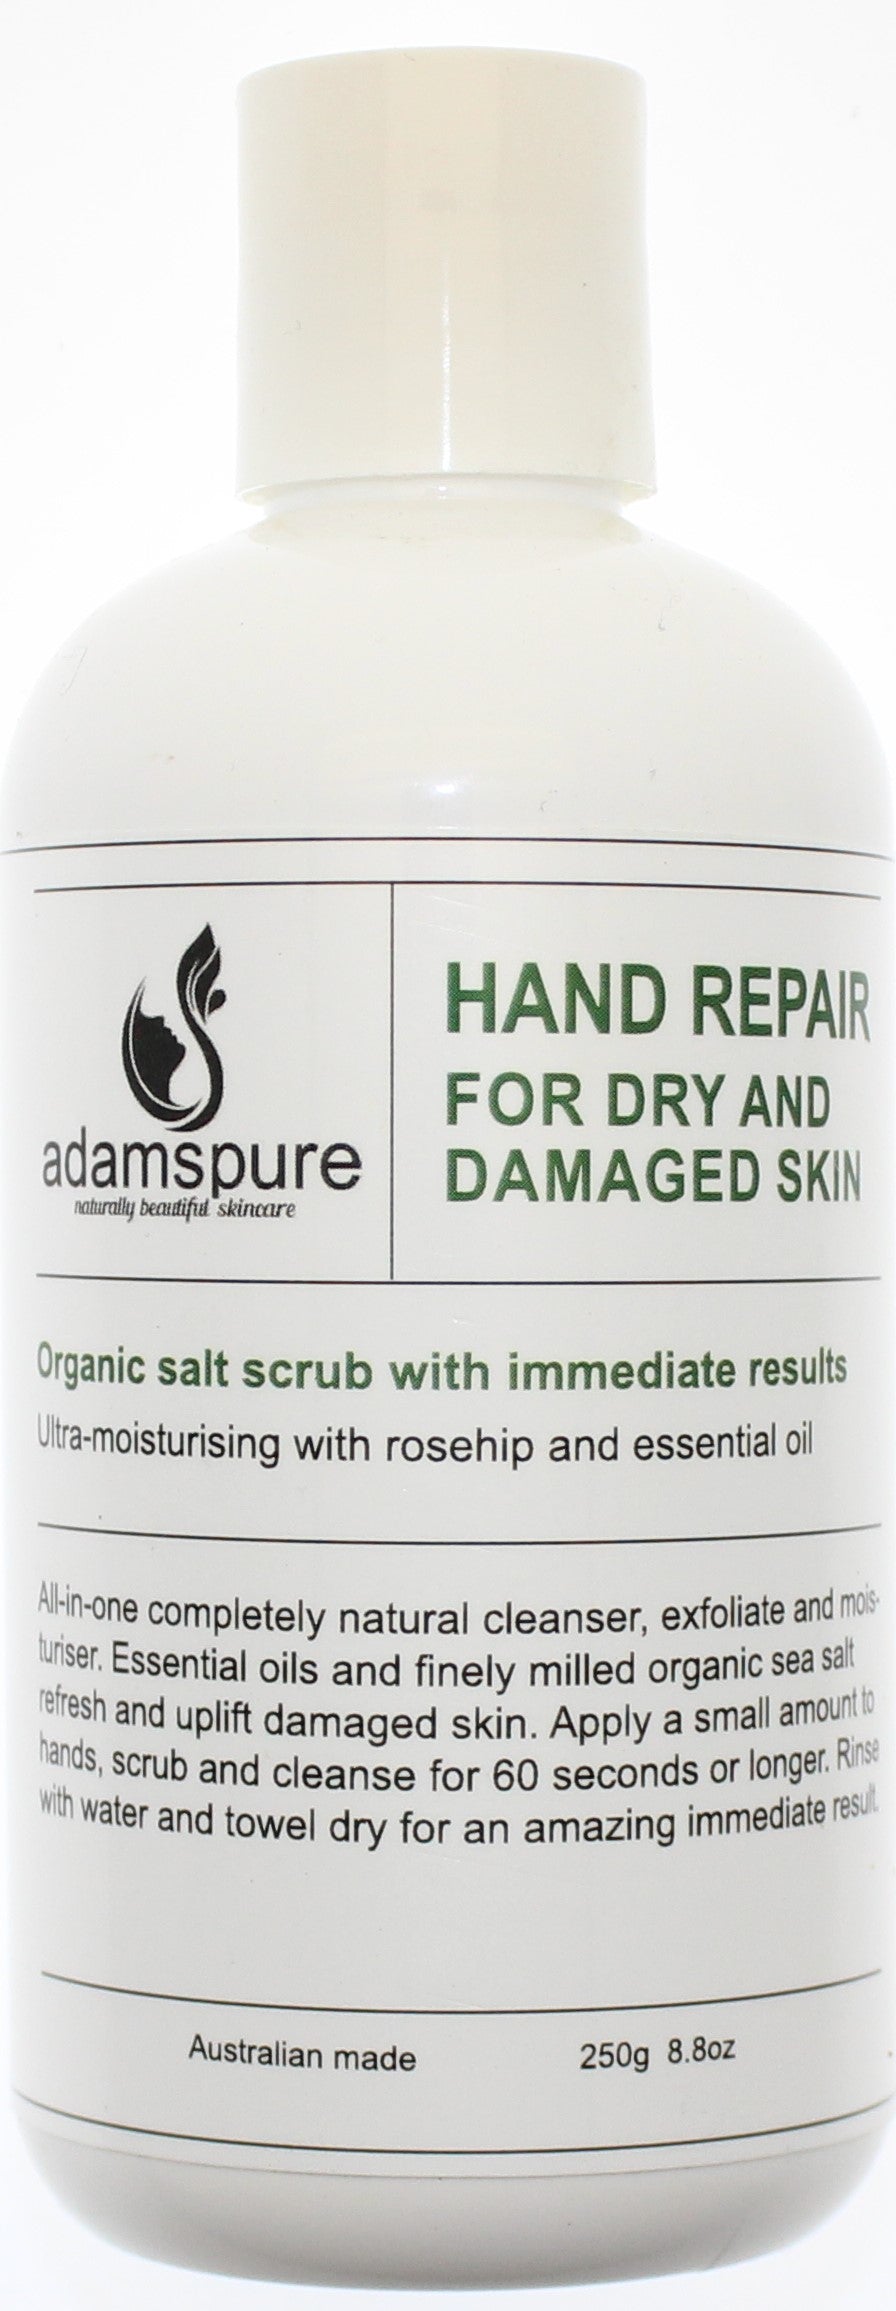 Dry skin hand repair cream with organic salt scrub with immediate results. 100% Australian made natural ingredients. 